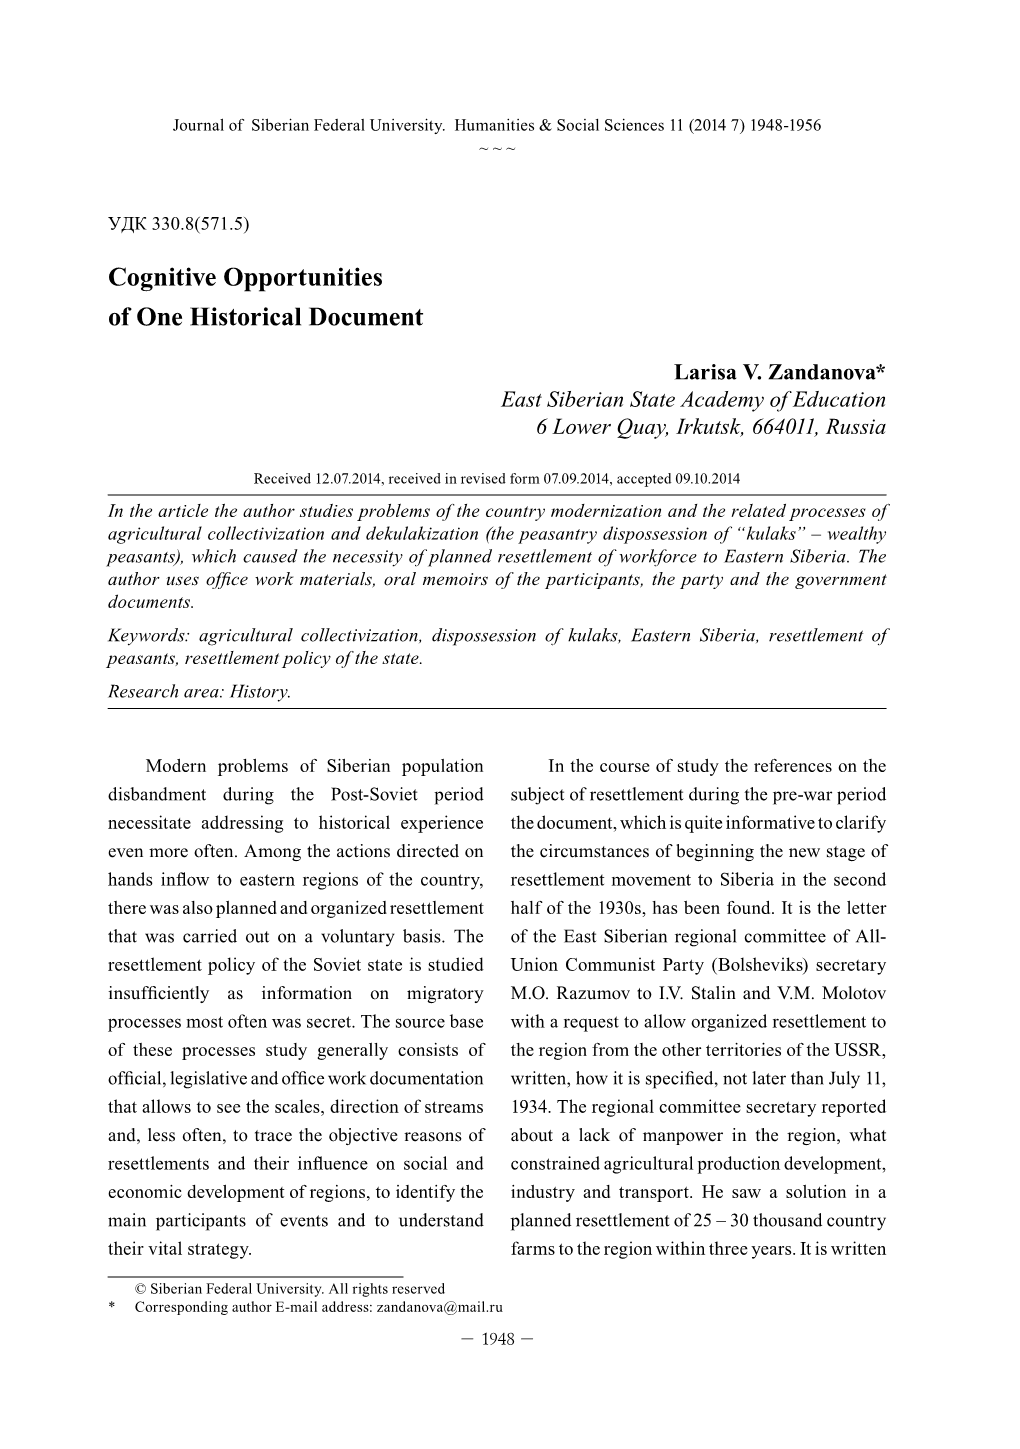 Cognitive Opportunities of One Historical Document